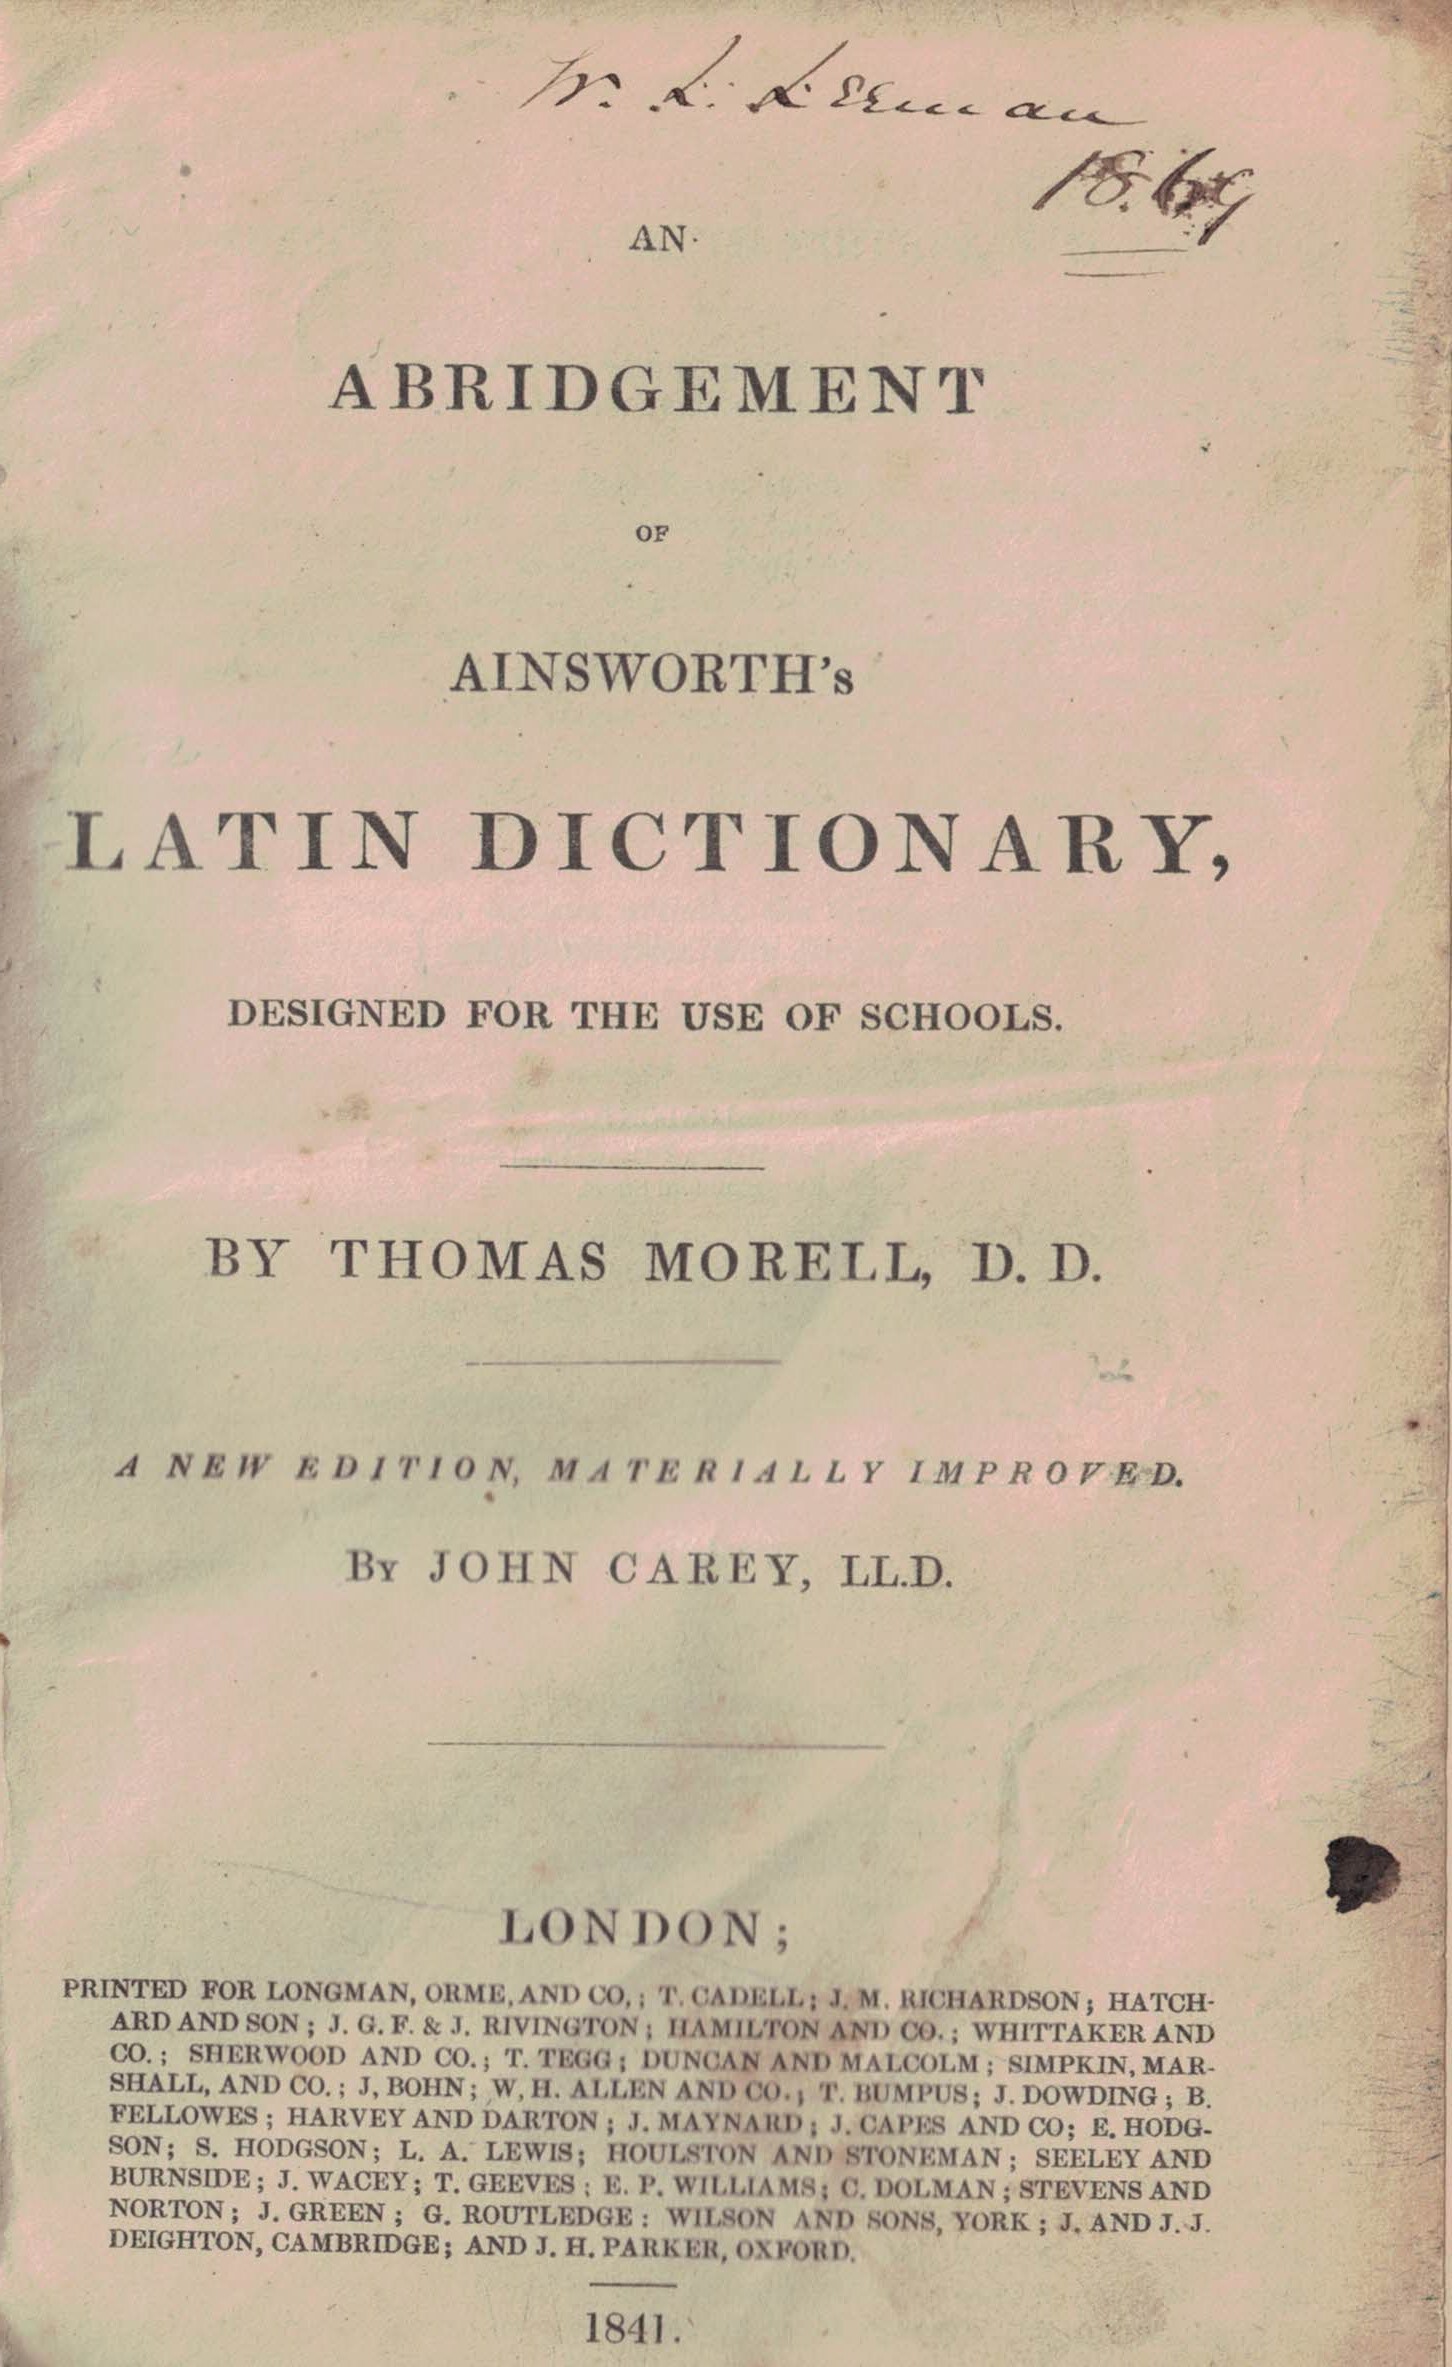 An Abridgement of Ainsworth's Latin Dictionary, Designed for the Use of Schools